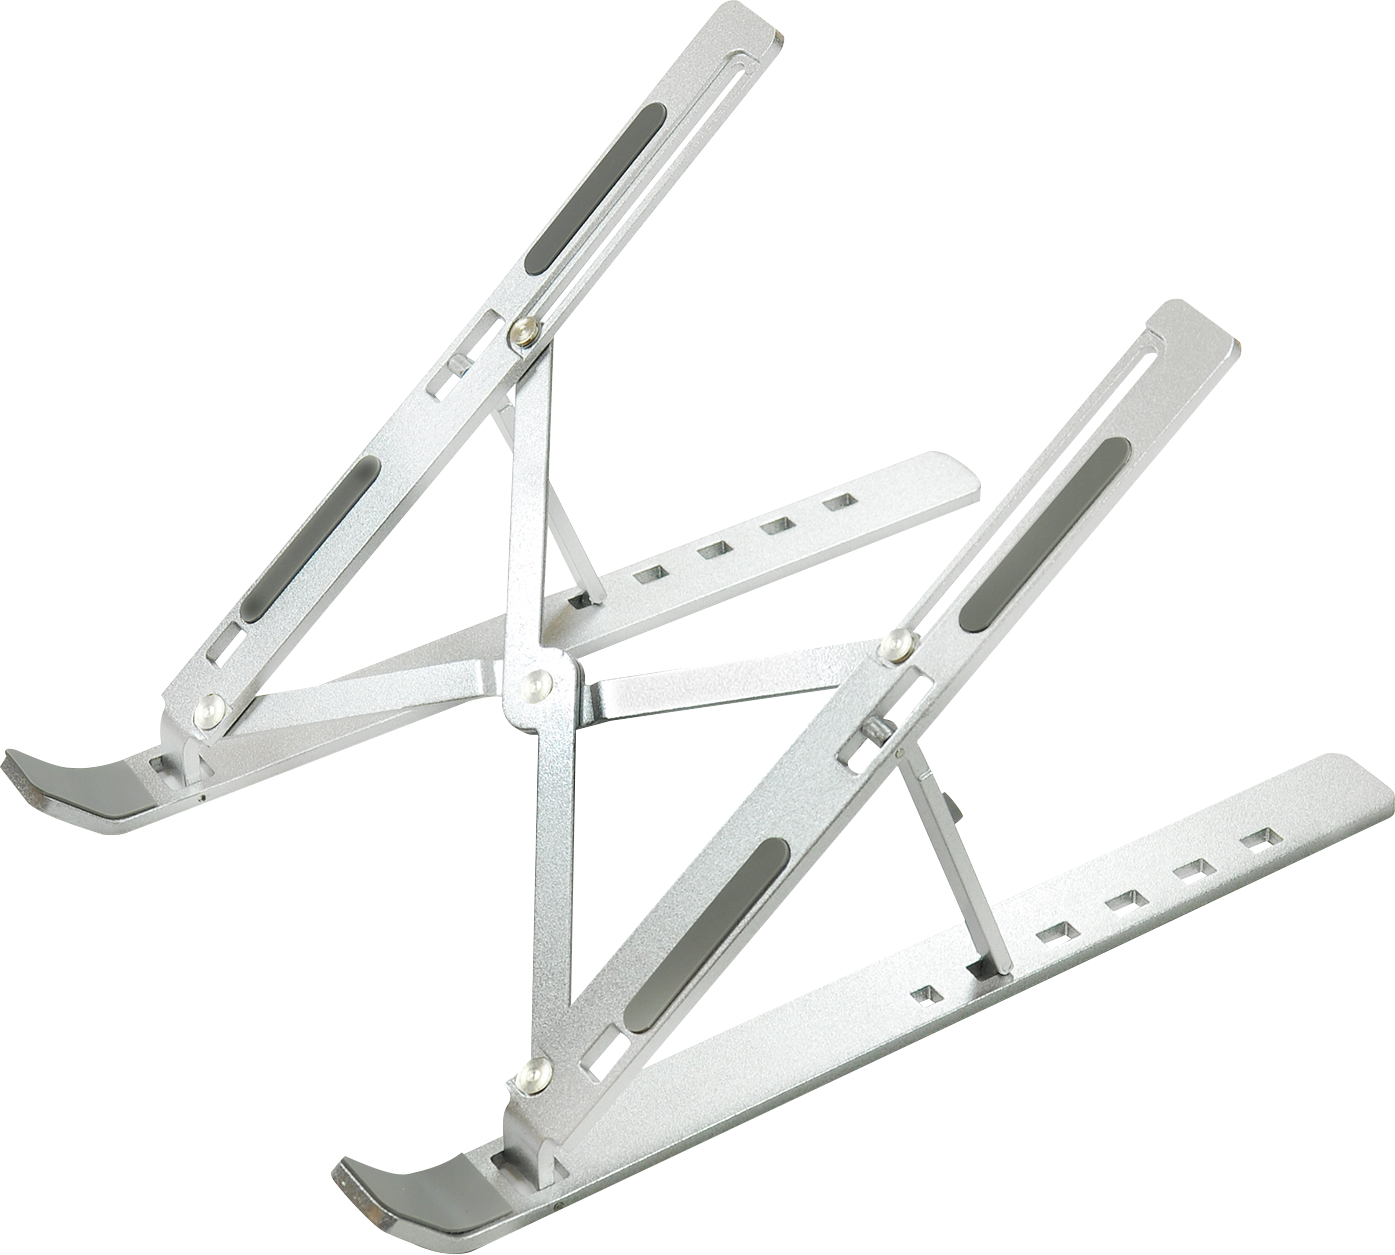 An image showing Folding Laptop Stand